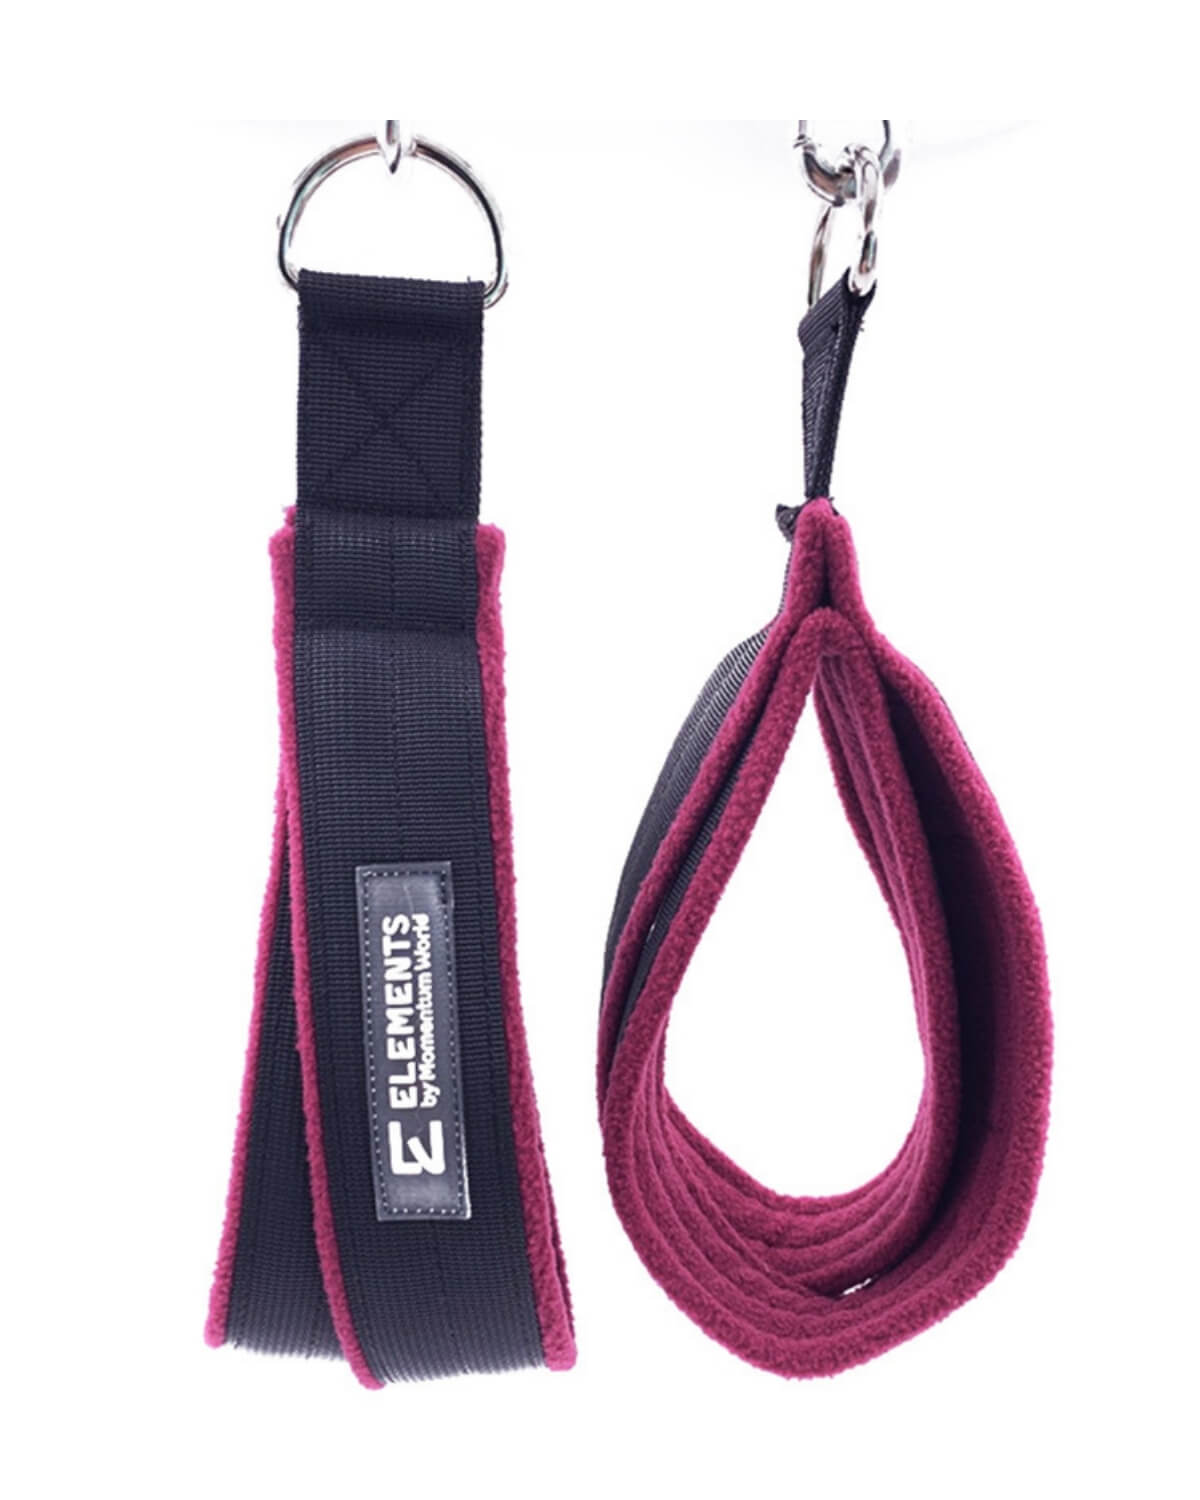 10 Standard Double Loop Straps - GYROTONIC®